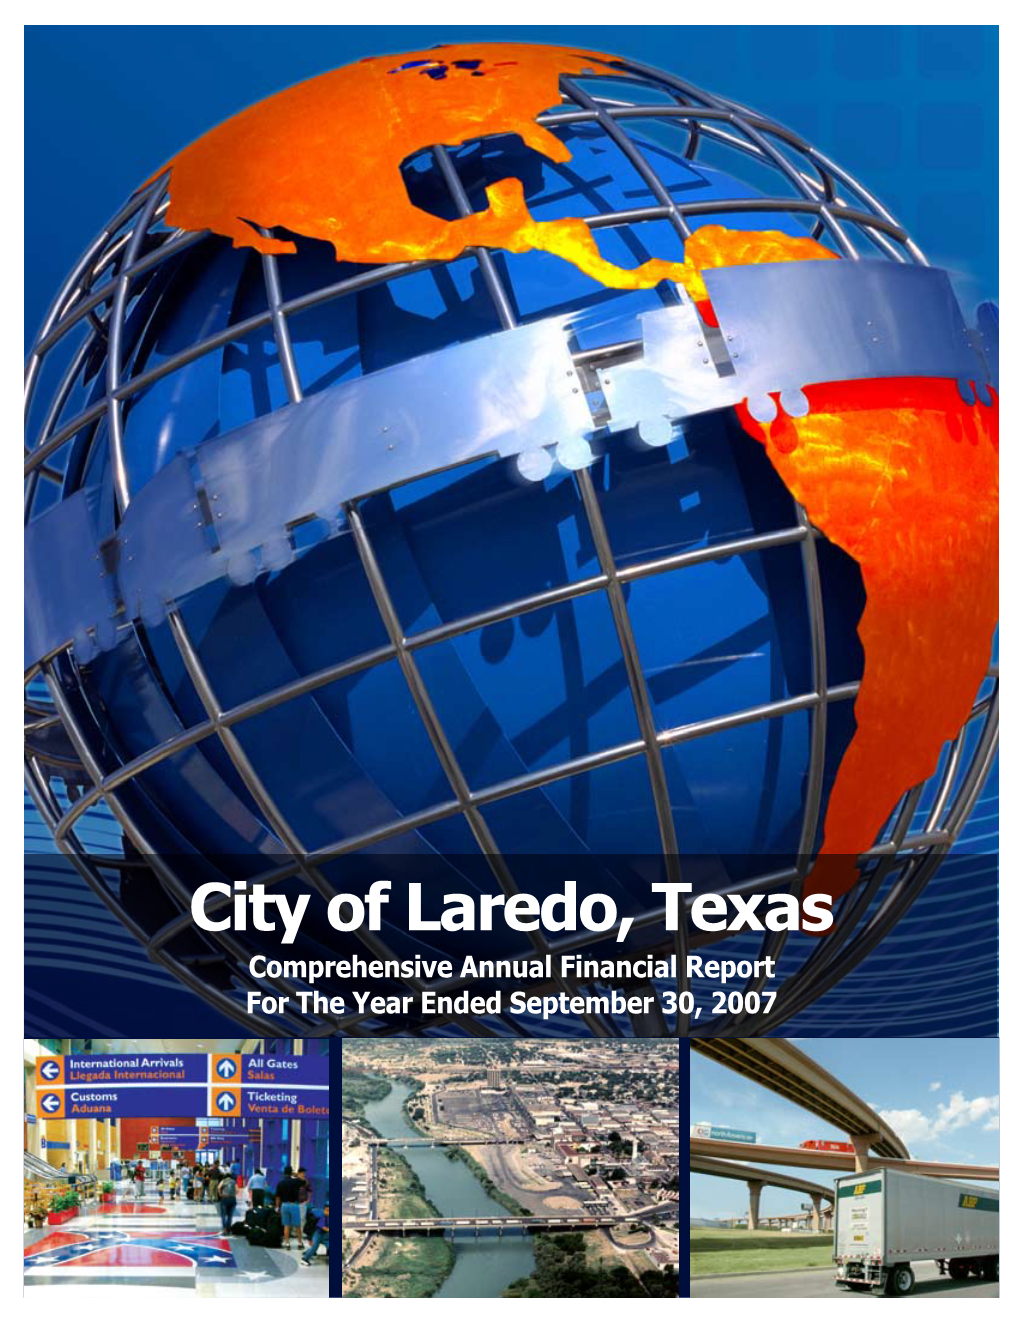 City of Laredo, Texas Comprehensive Annual Financial Report for the Year Ended September 30, 2007 CITY of LAREDO